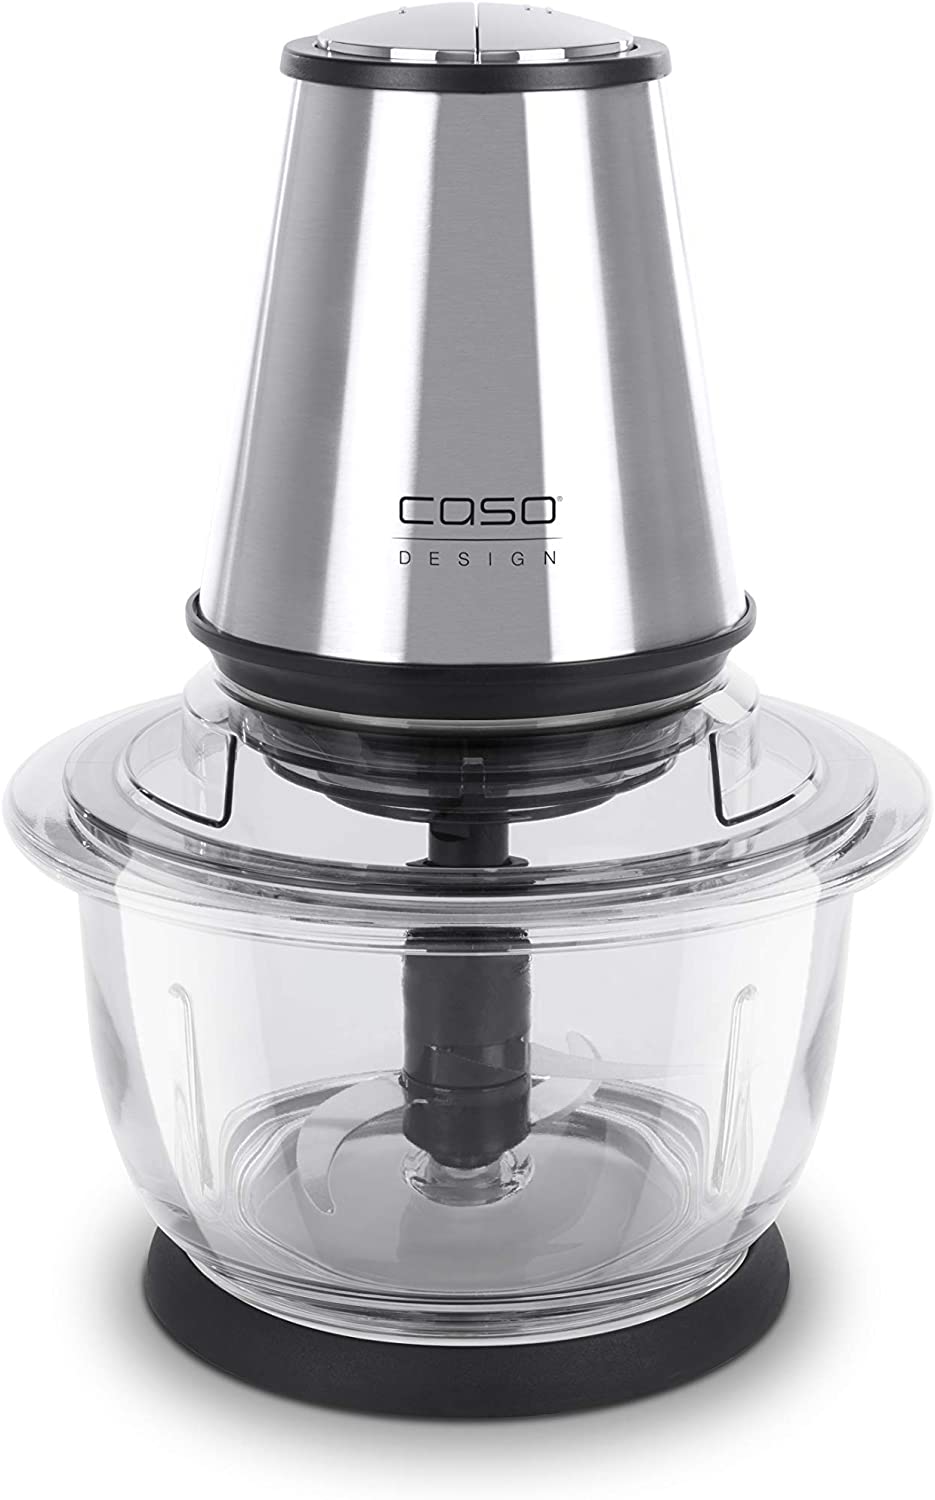 CASO UZ 400 - Universal Chopper - 4 High Quality Stainless Steel Knives - Heavy Duty Glass Container with 1.2 Litre Capacity - Ideal for Chopping Fruit, Vegetables, Fish, Meat, Nuts